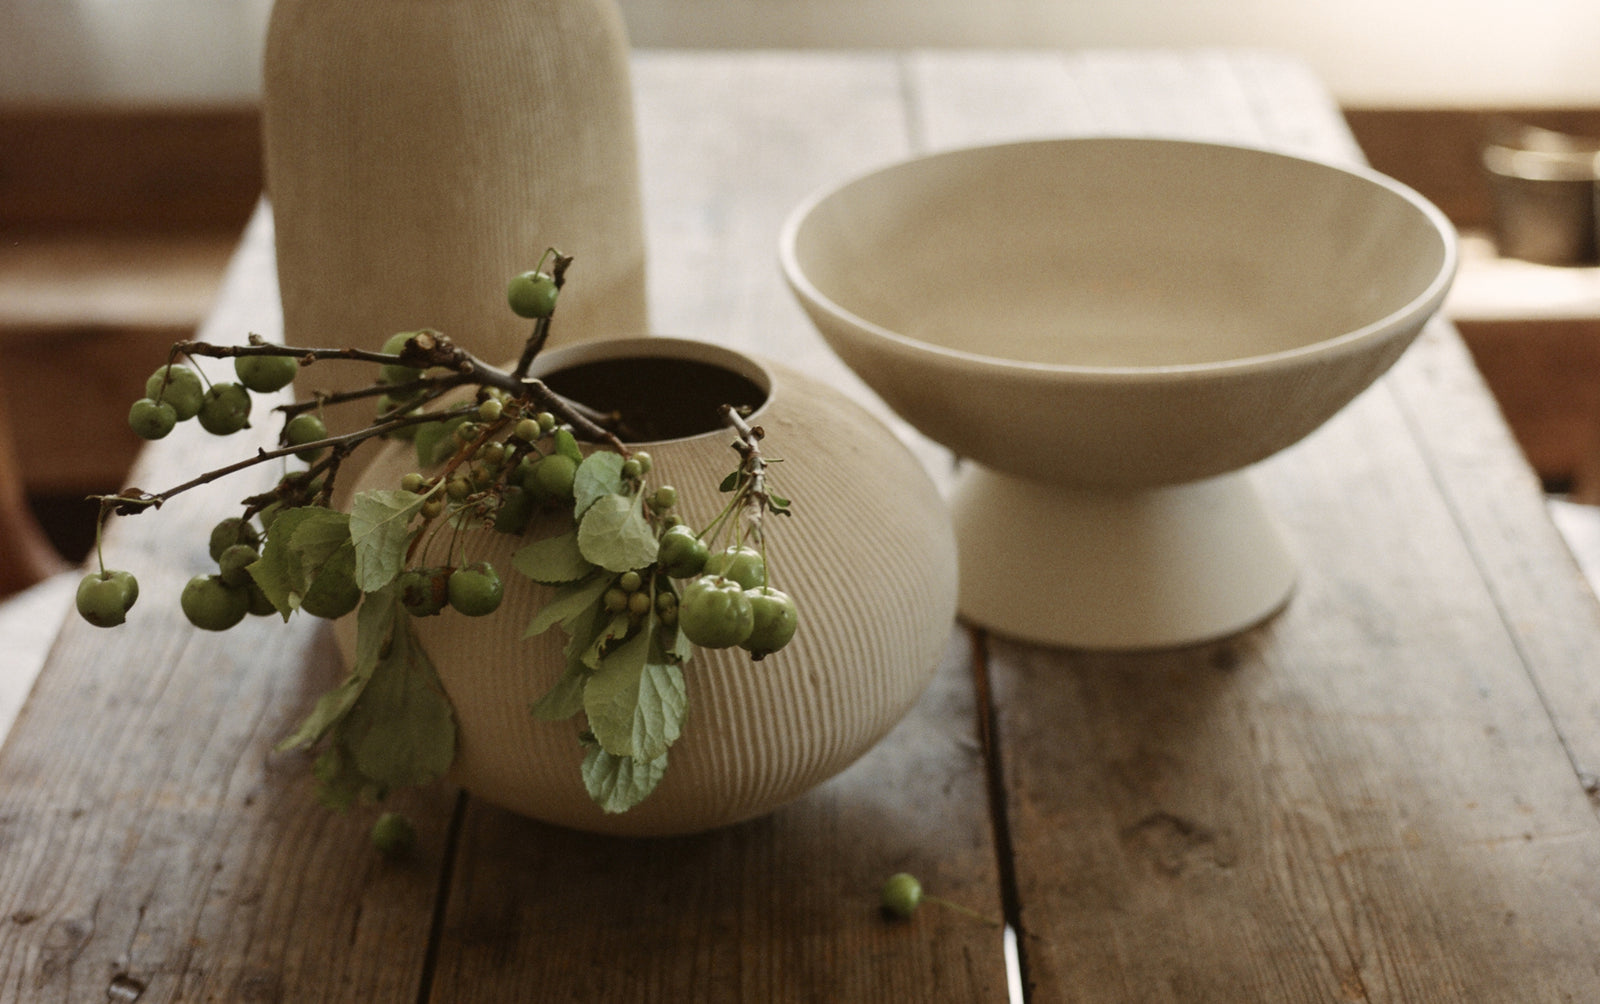 Ceramicah - Dune vessel collection in ribbed stone finish sitting on a kitchen table